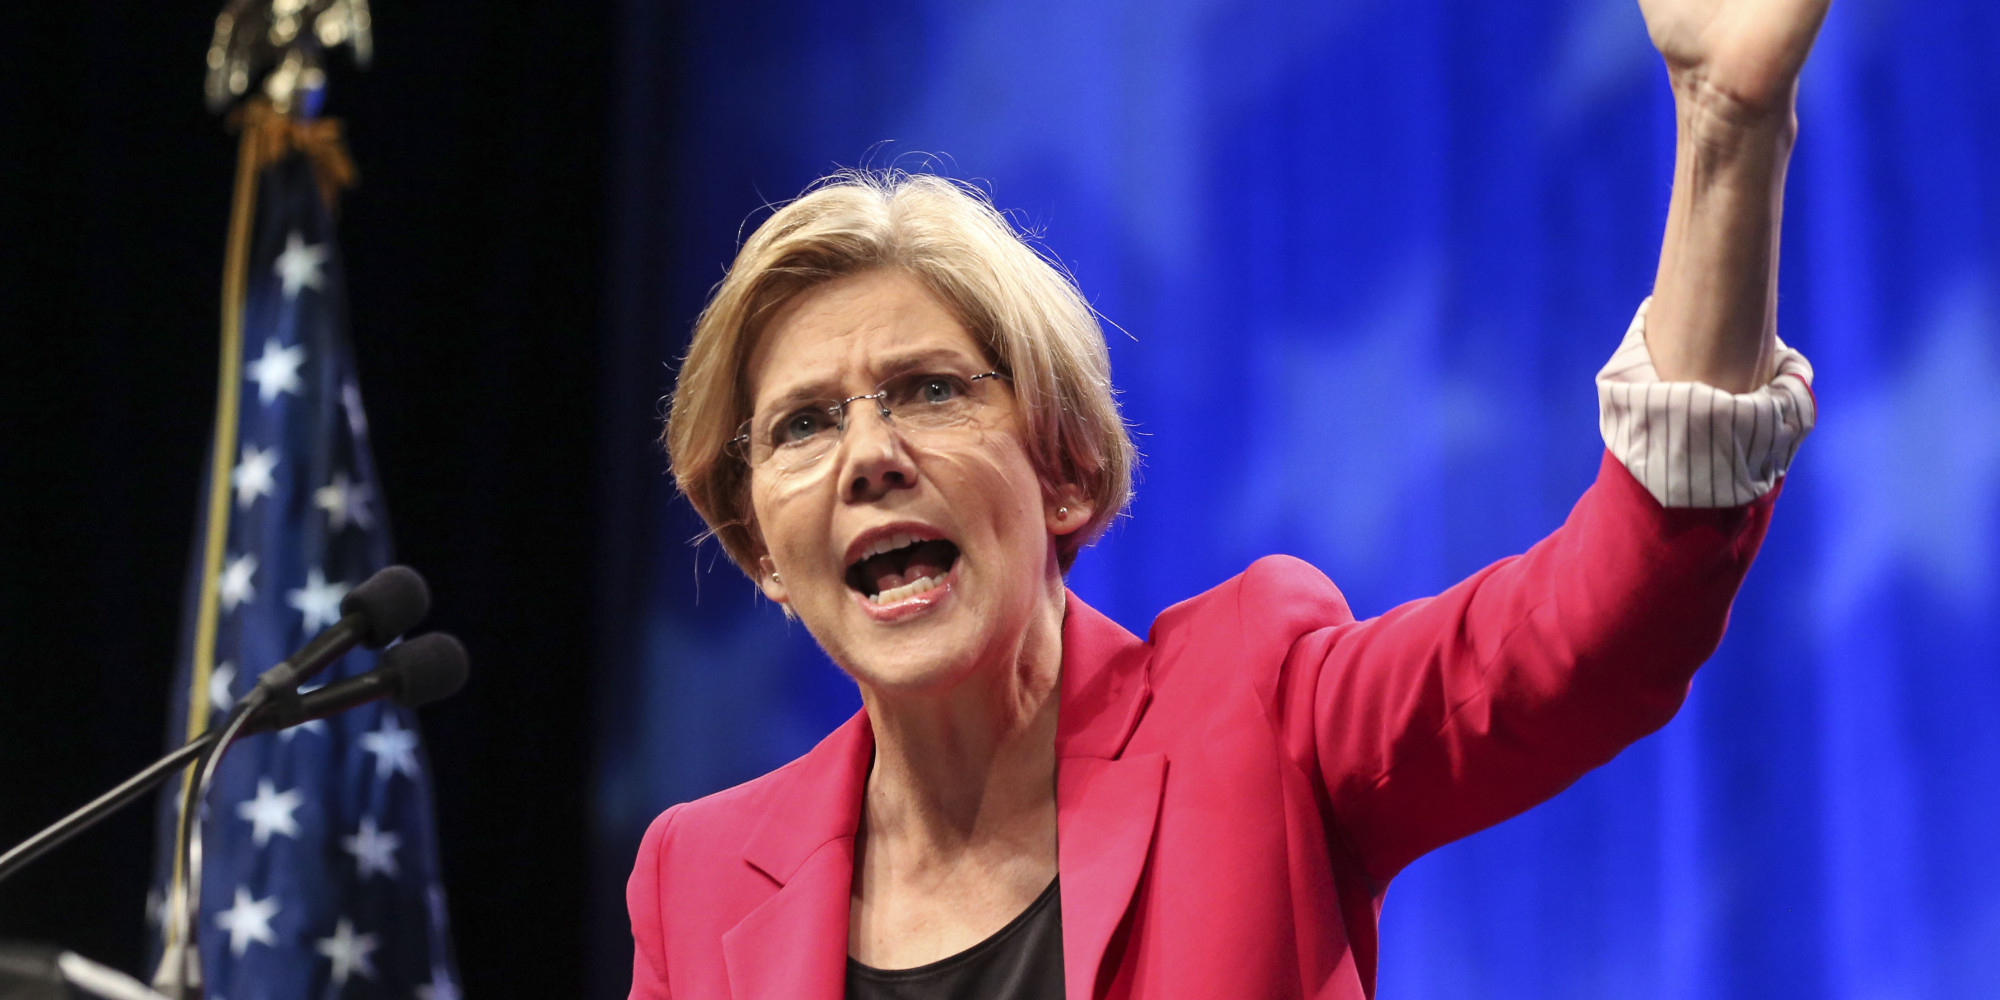 #ShePersisted Becomes Rallying Cry for Elizabeth Warren's Supporters